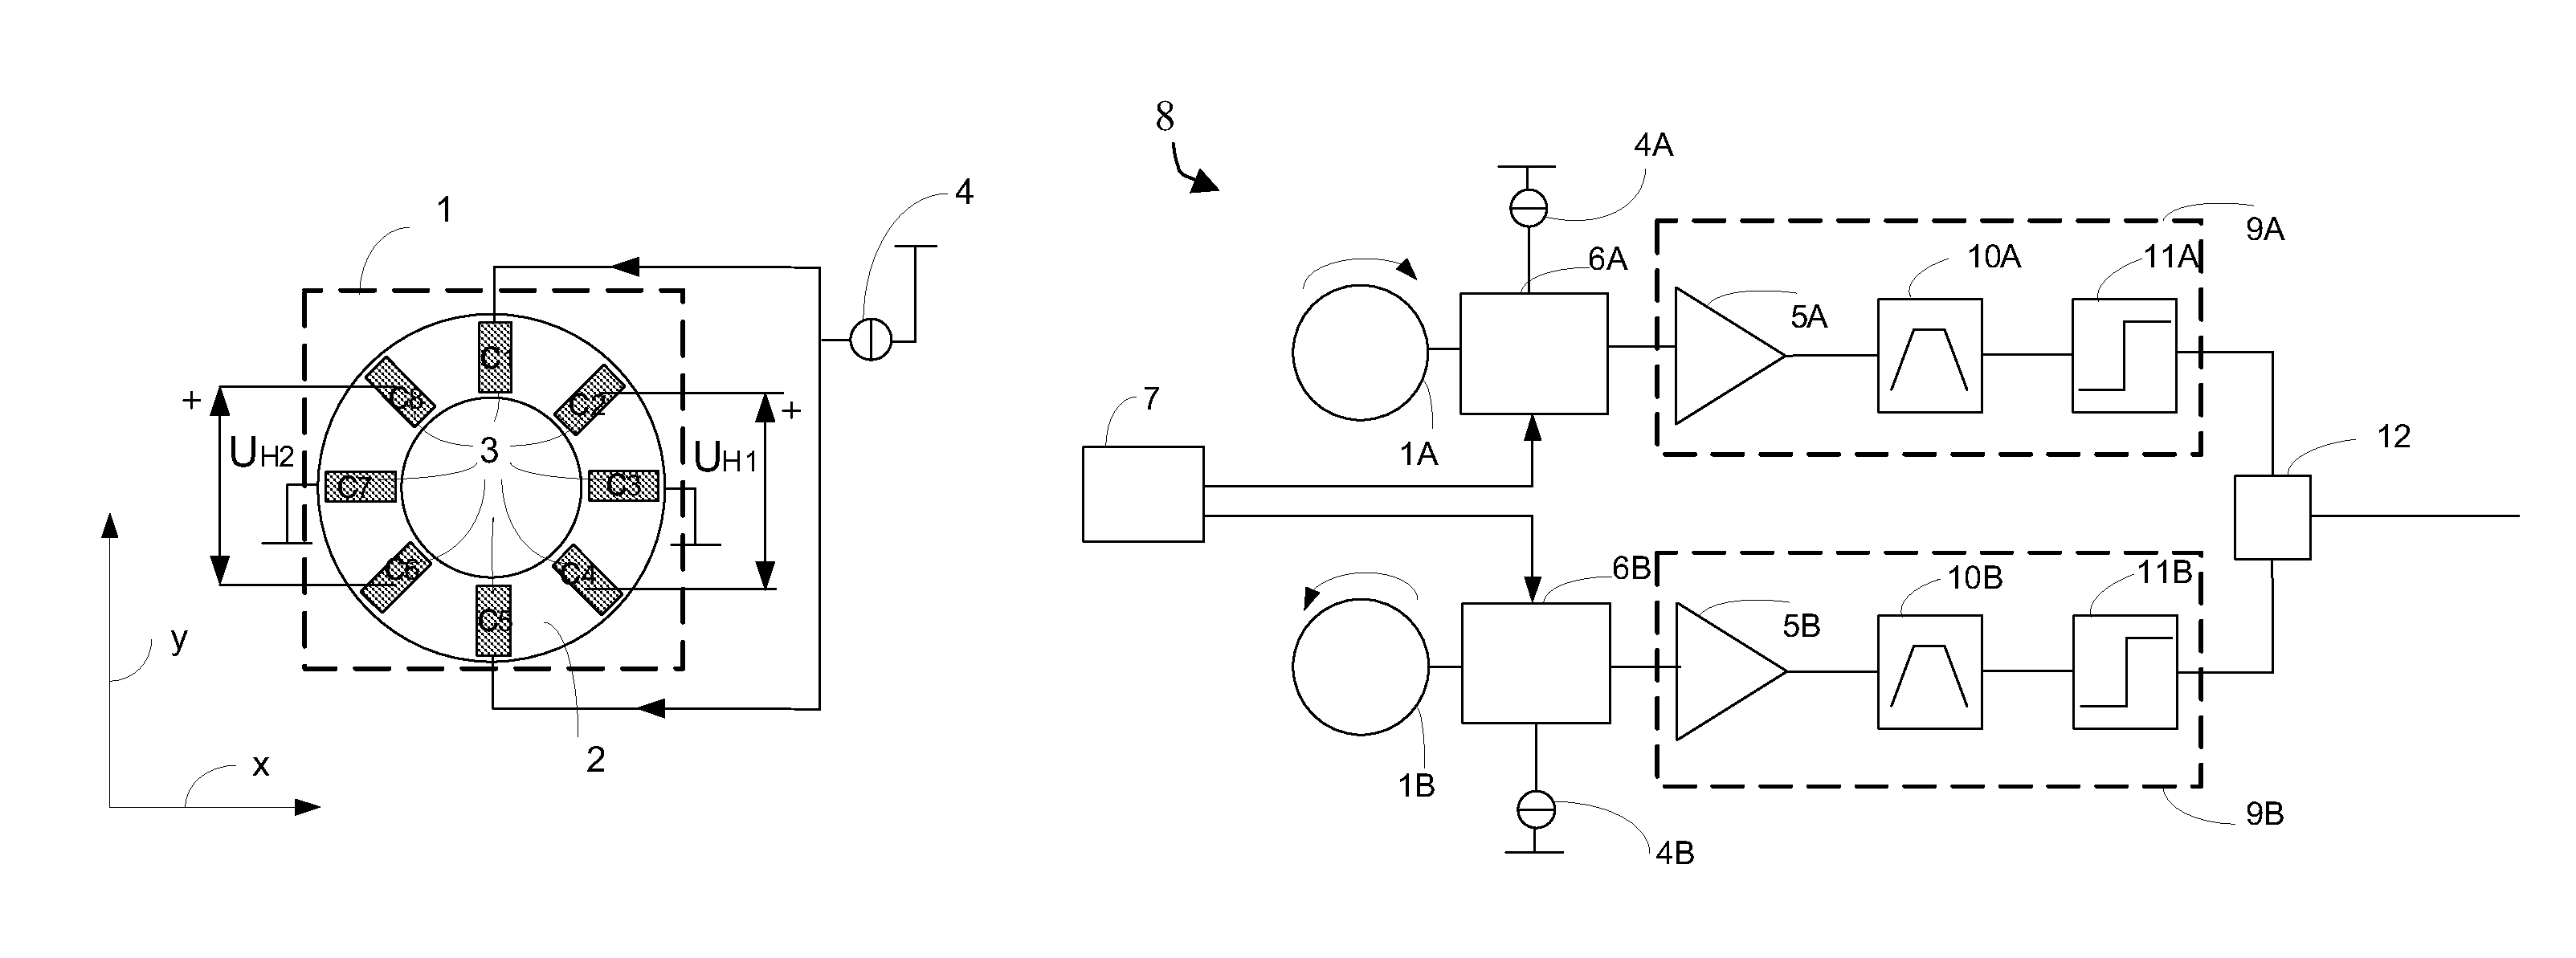 Magnetic field sensor measuring a direction of a magnetic field in a plane and current sensor